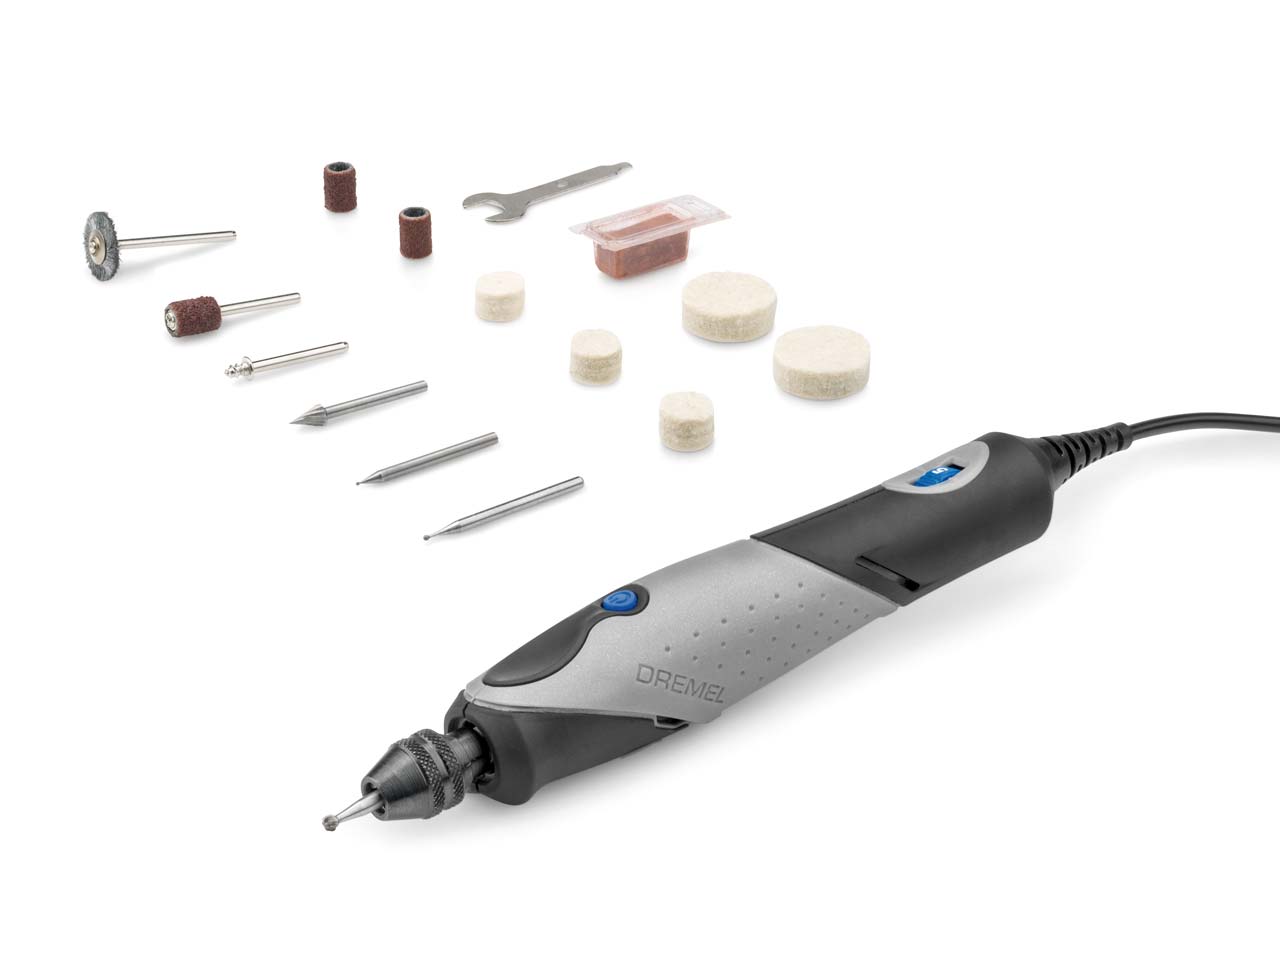 Do you have instructions for Dremel Stylo Mini Drill Kit?